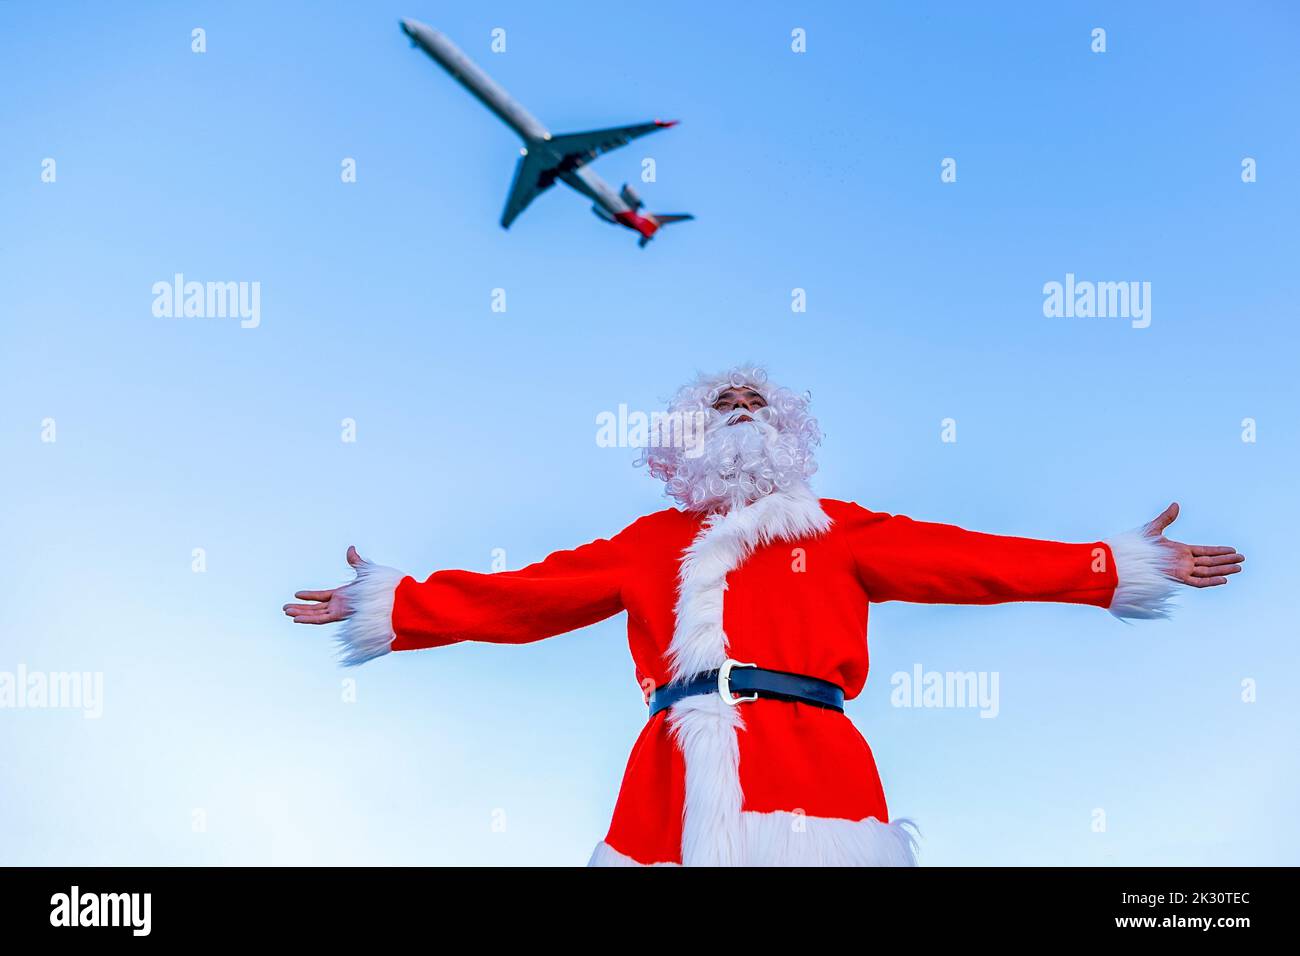 Man wearing Santa Claus costume standing with arms outstretched below flying airplane Stock Photo